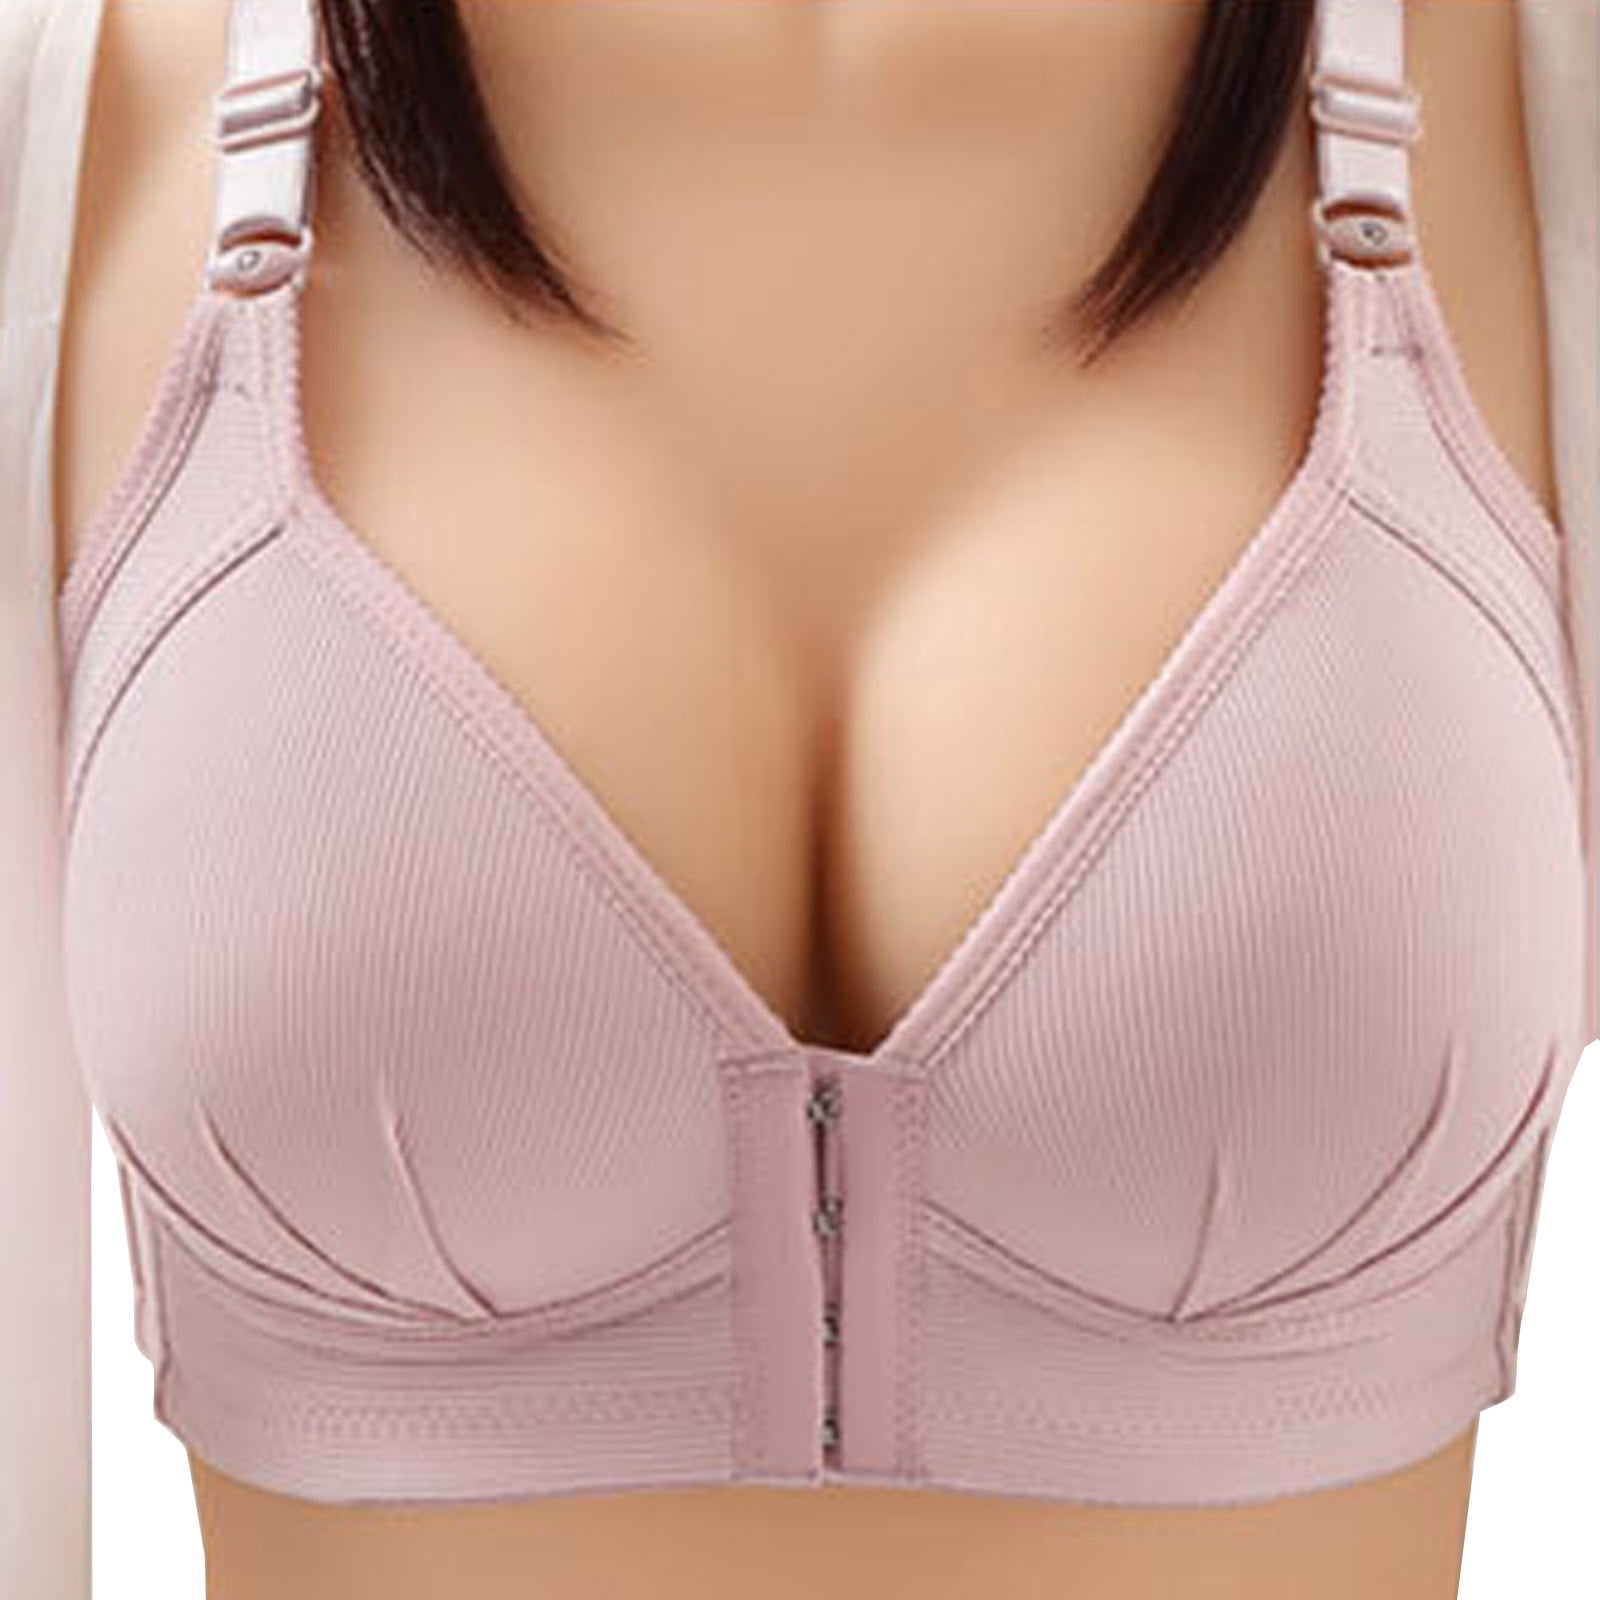 Clearance Deals! Zpanxa Plus Size Bras for Women No Underwire Full